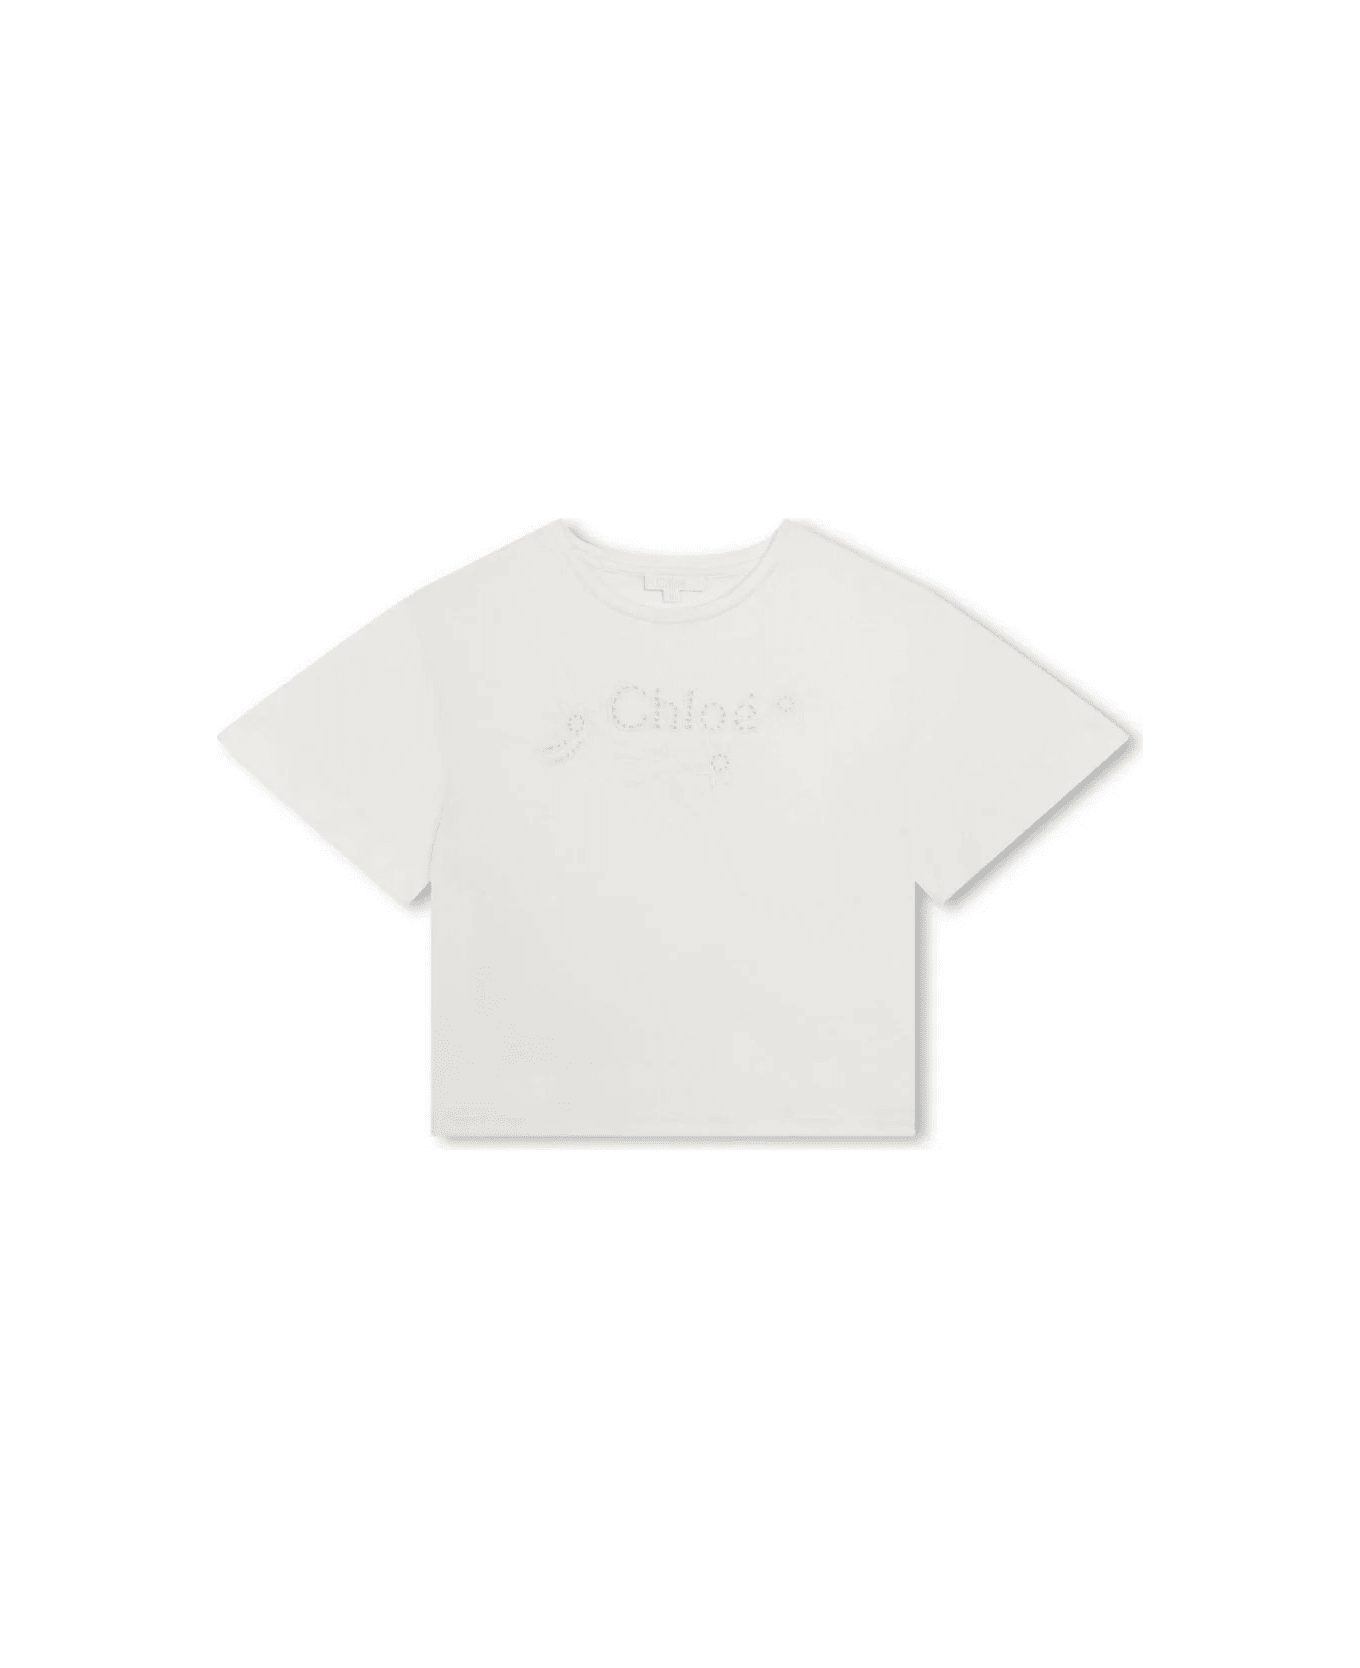 Chloé White T-shirt With Cut-out Embroidery Logo - White